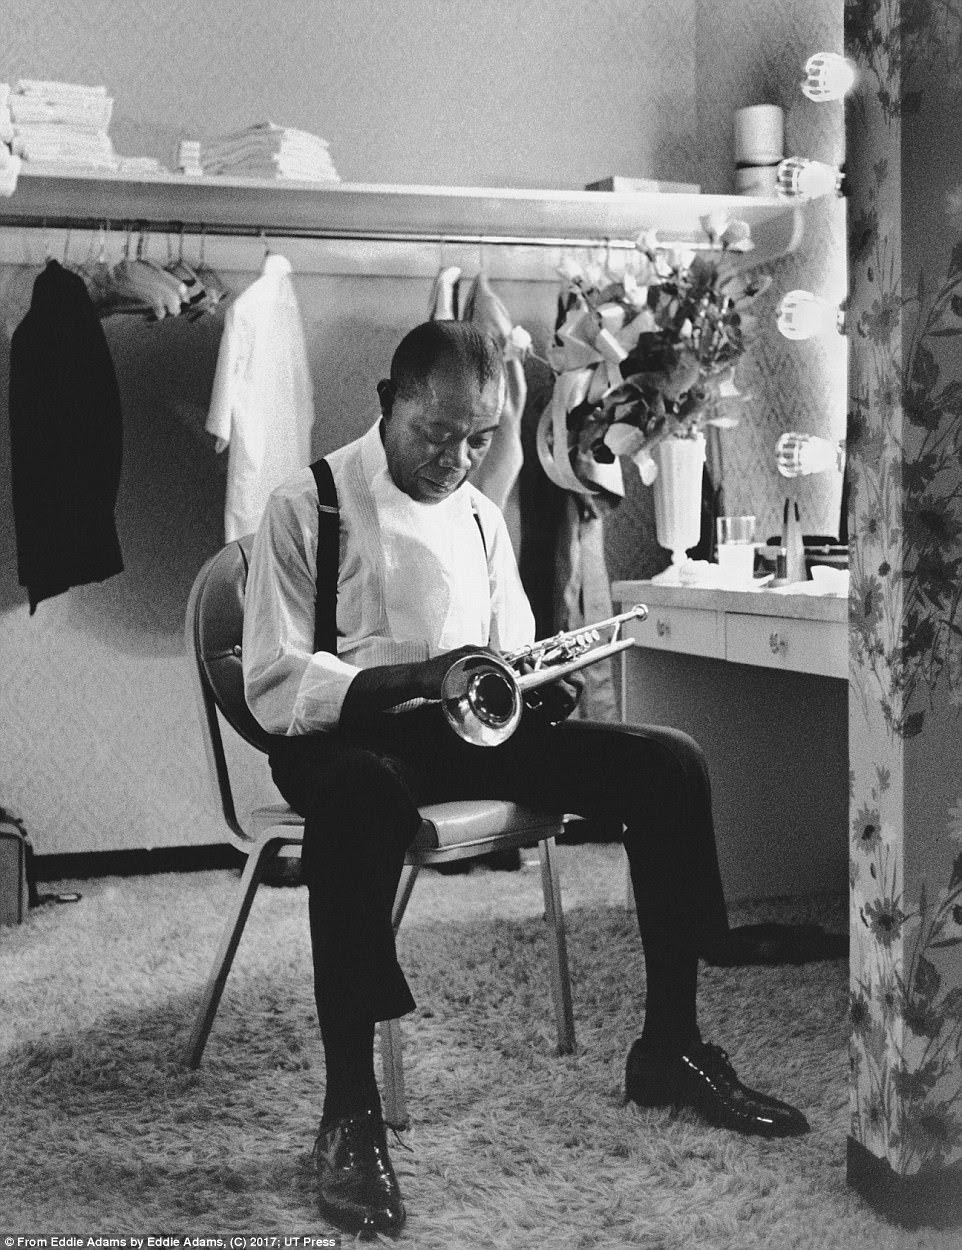 Musician Louis Armstrong in his dressing room at the International Hotel in Las Vegas on September 6, 1970